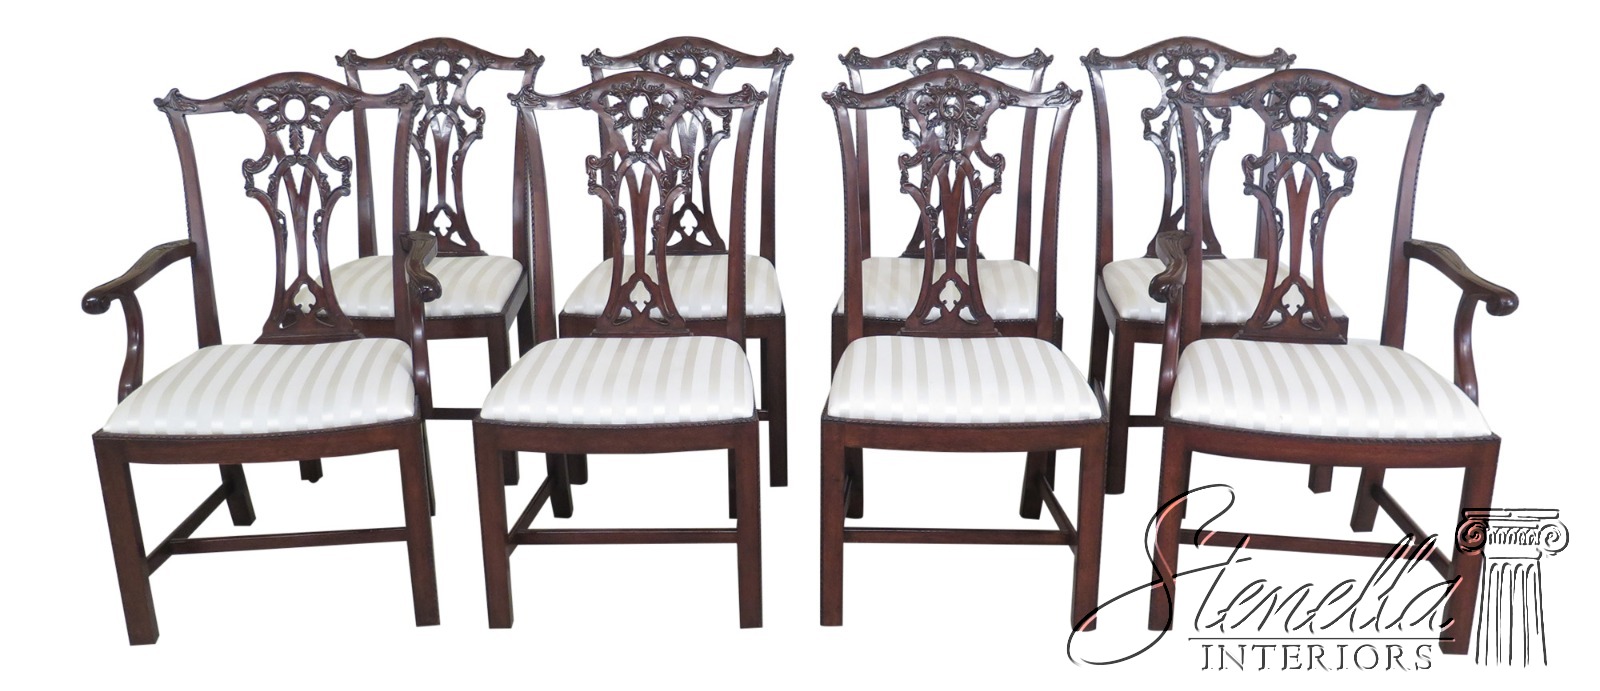 Ecker Shane Dining Room Chairs By Henredon